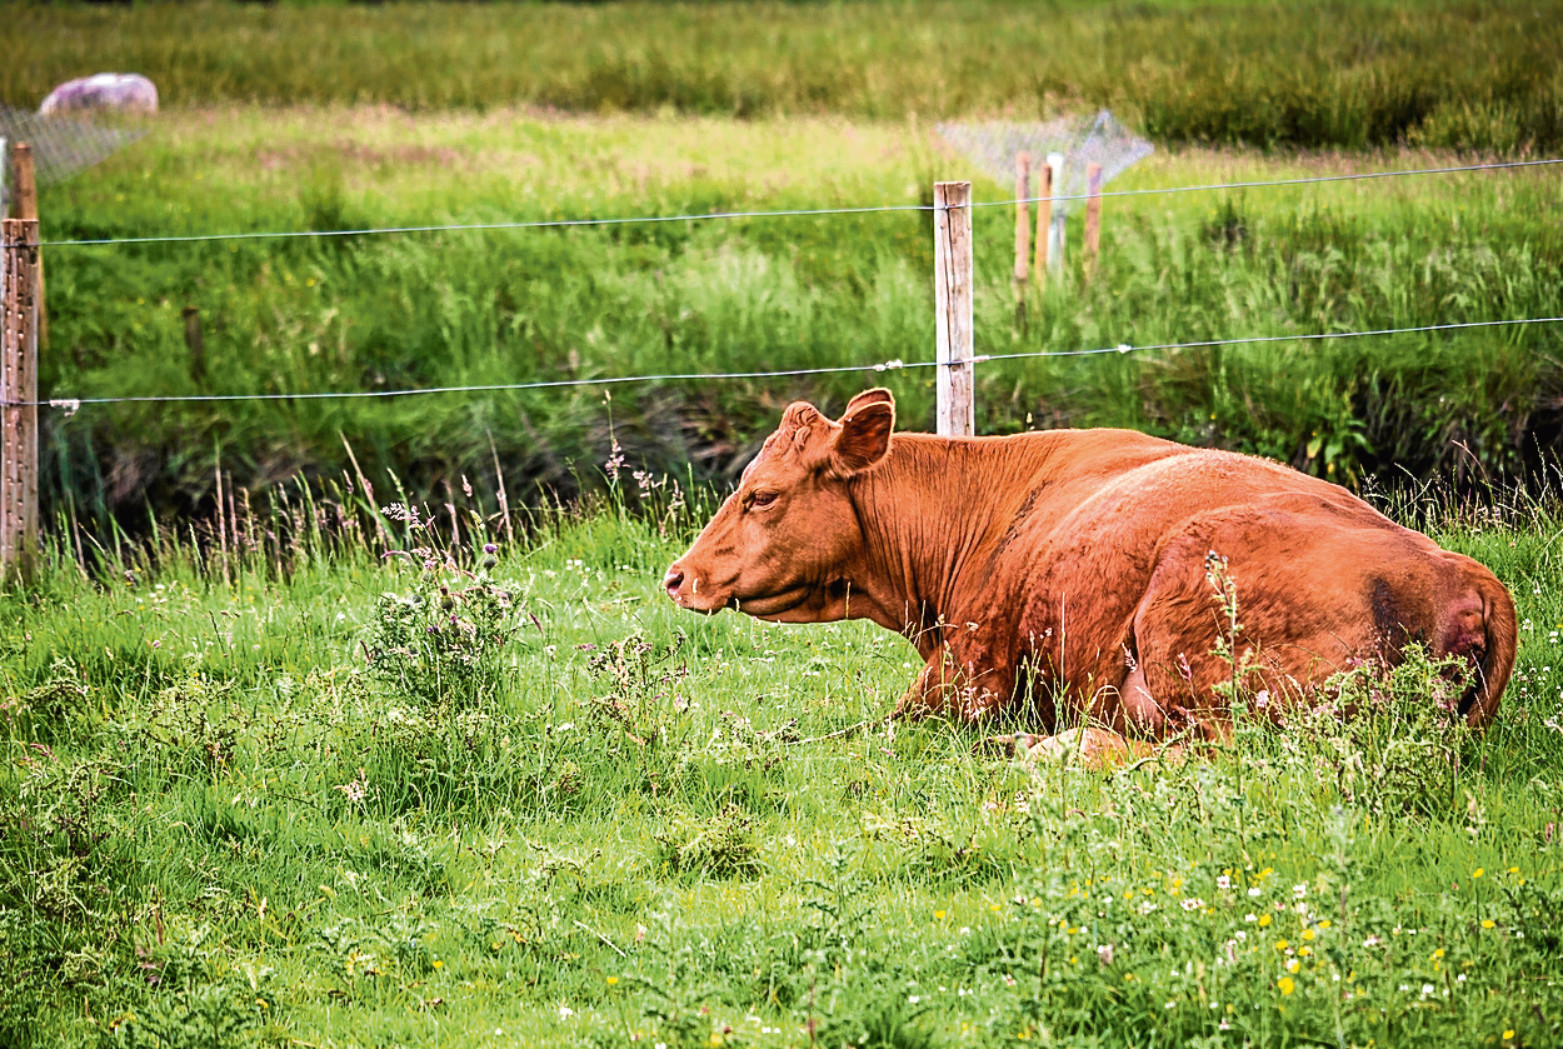 Is this a warning of rain? No, likely the cow is just feeling tired and wants a rest!